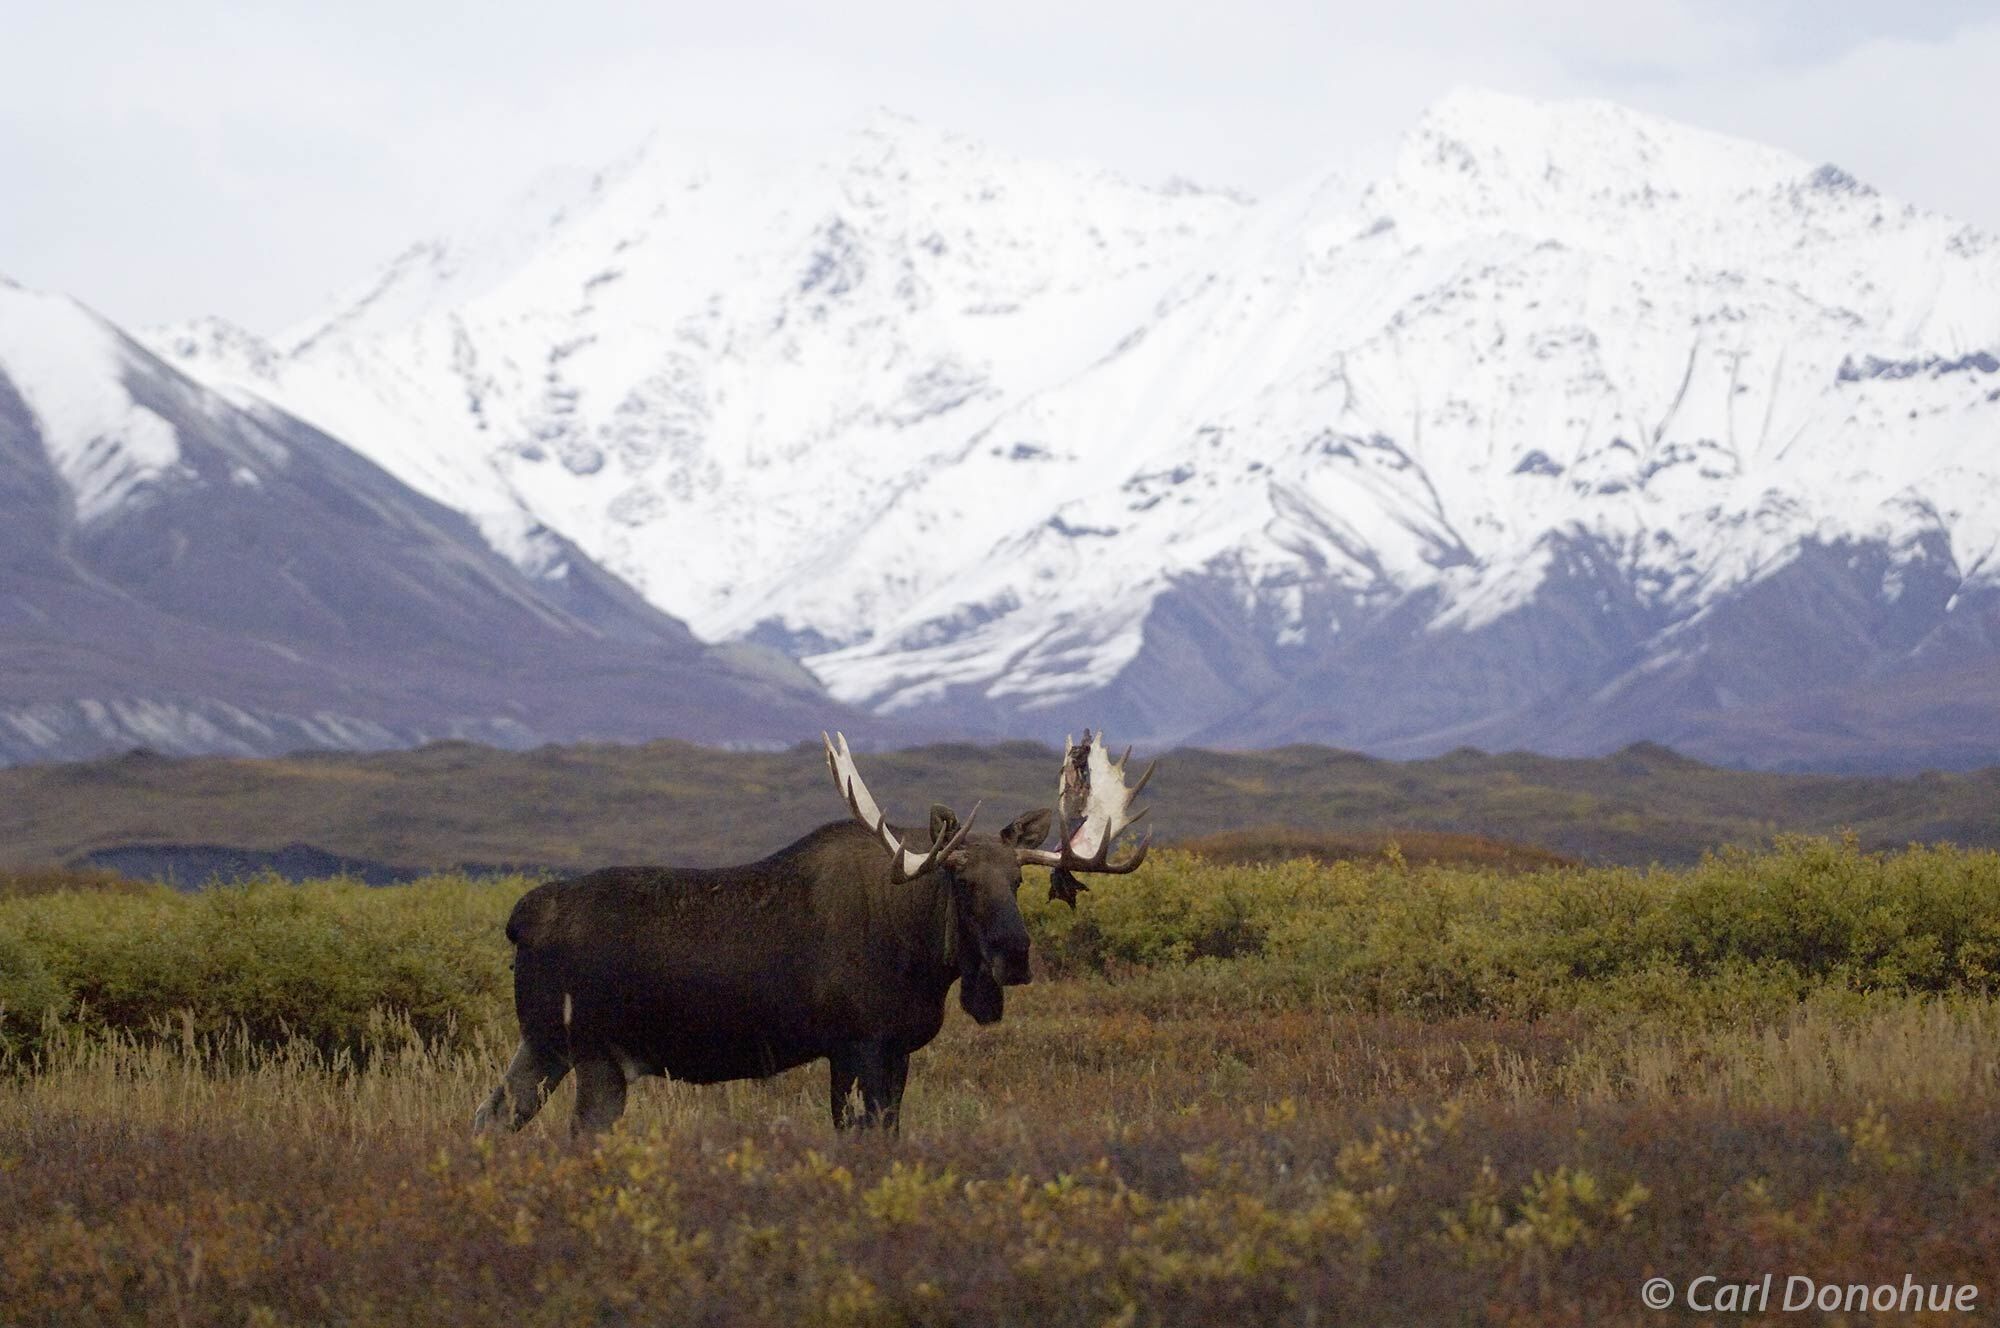 The bull moose is a true master of its domain, as seen in this fall photo from Denali National Park. The Alaska Range stand behind...